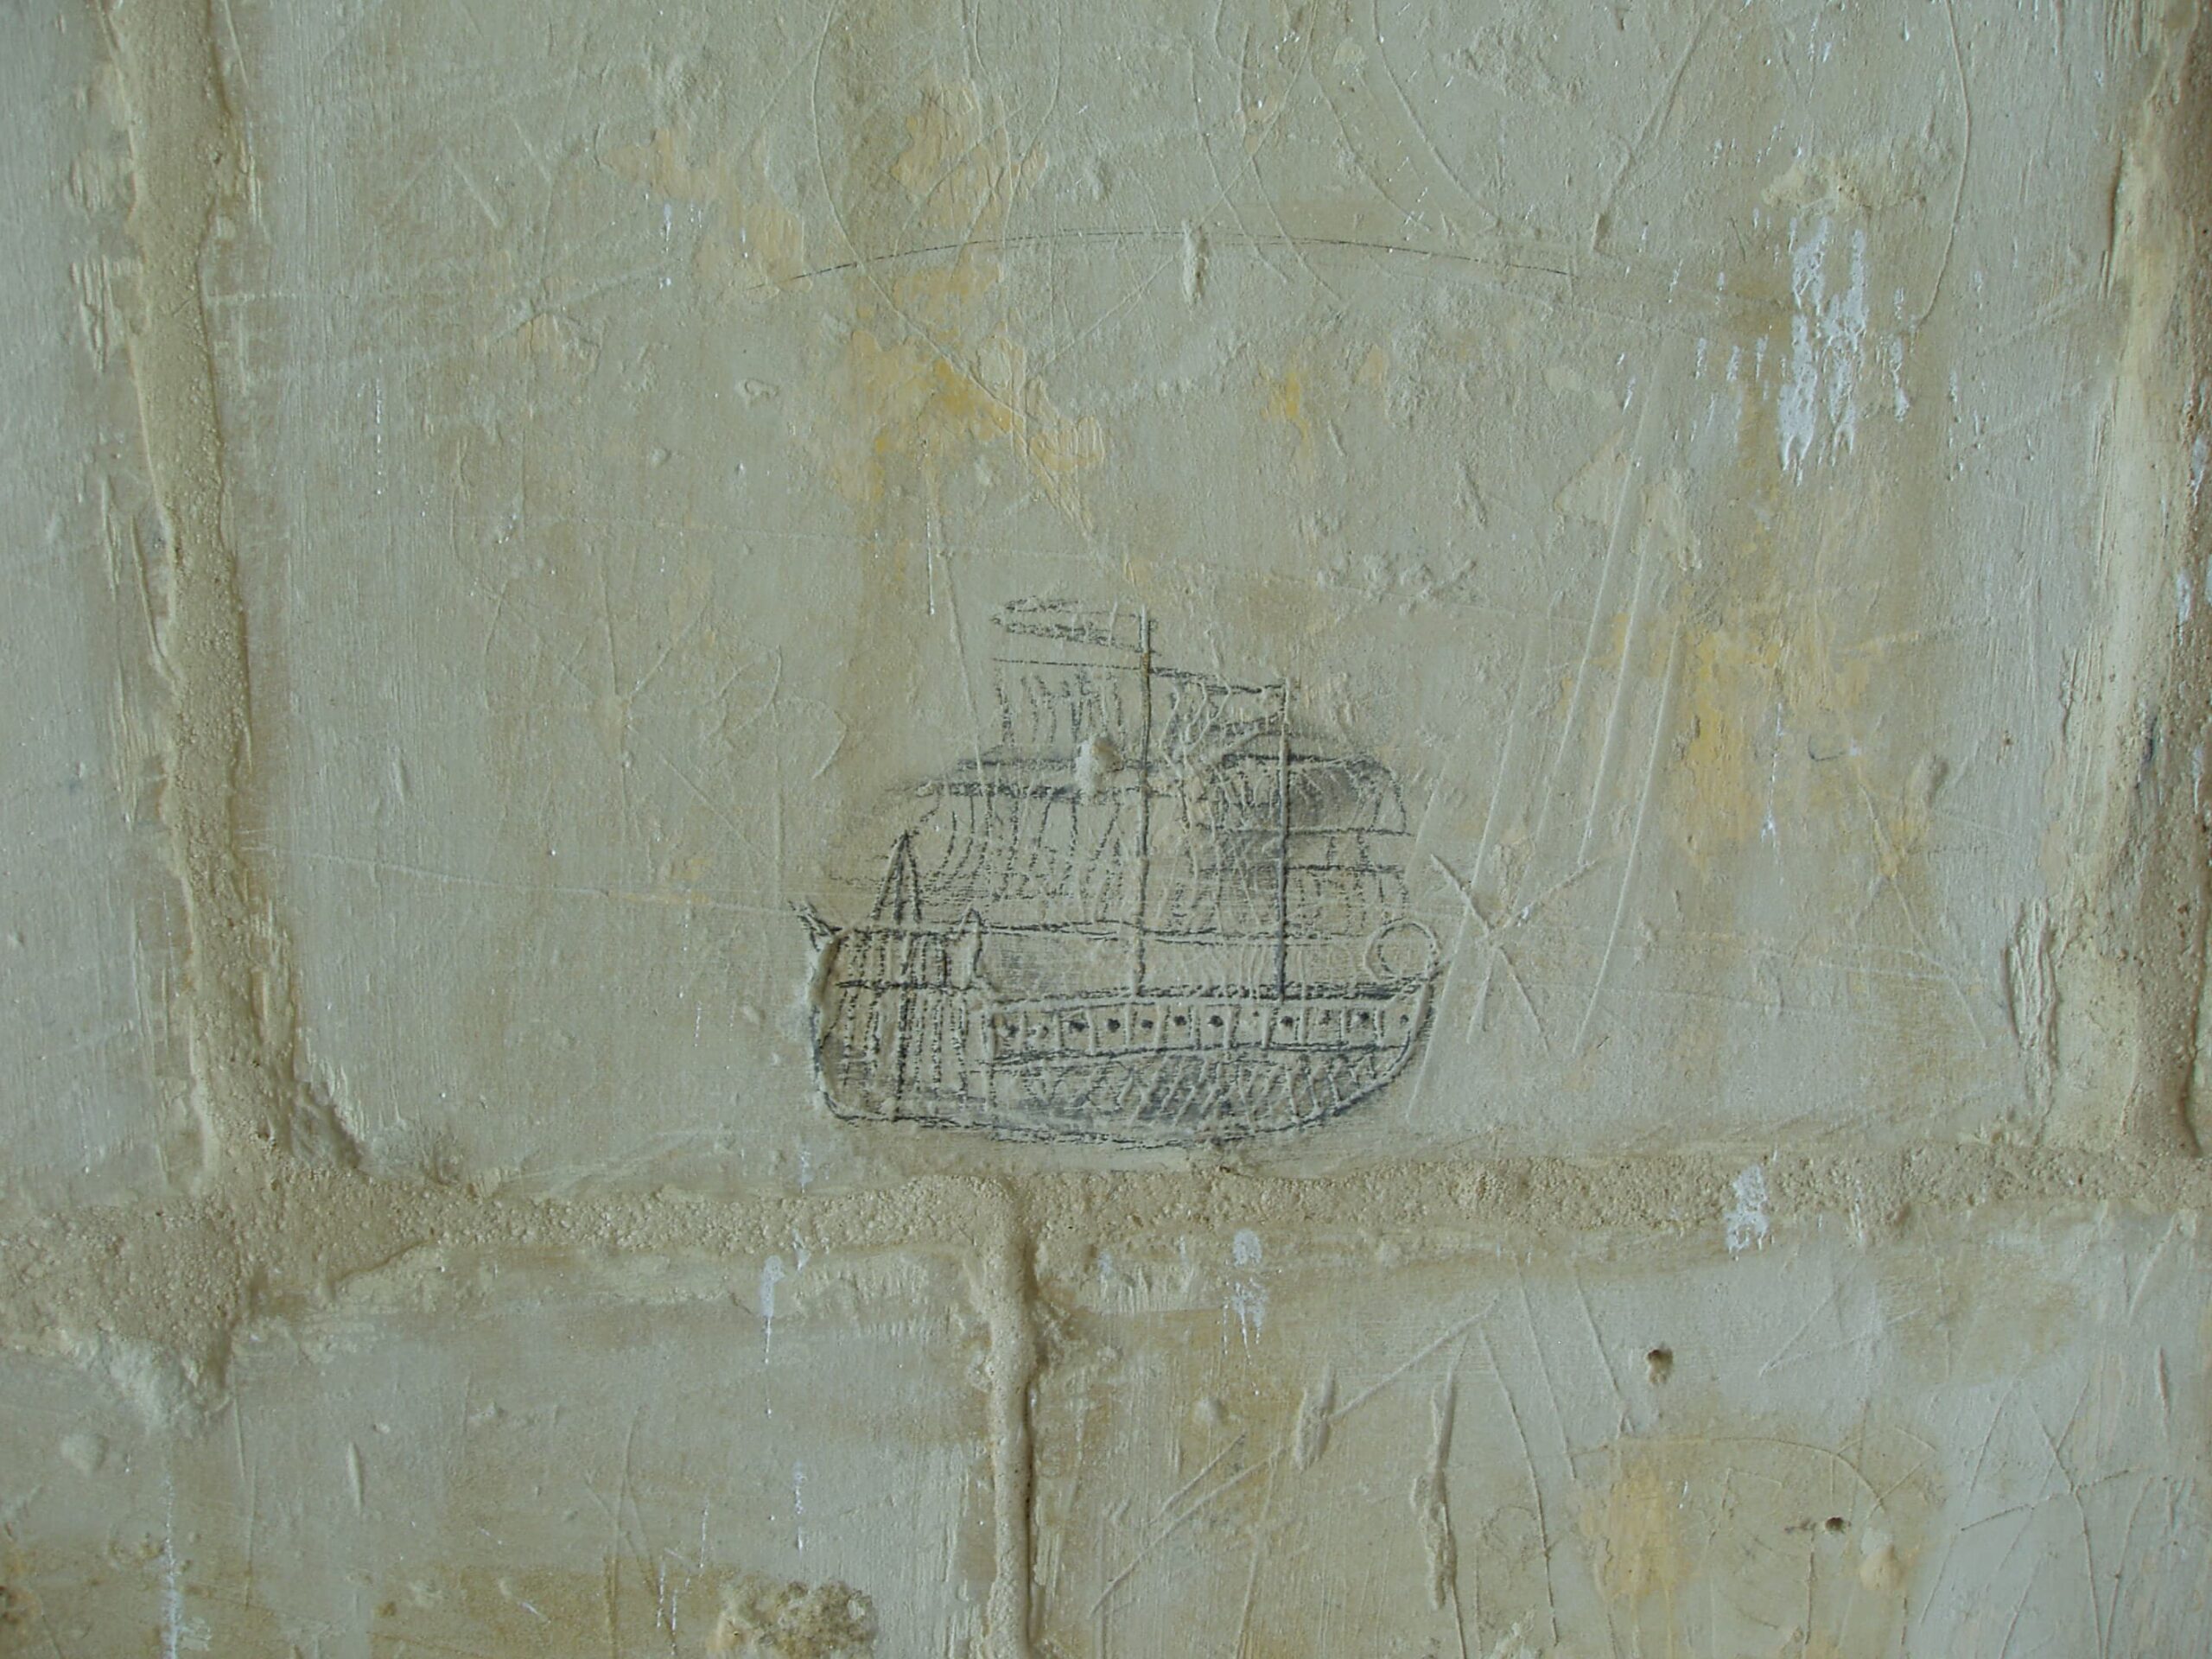 Drawn with a dark-coloured implement on the wall is a representation of a ship. The two masts carrying square rigging can be identified together with a tall stern and a row of cannon ports. Flags are depicted, flying from masts.